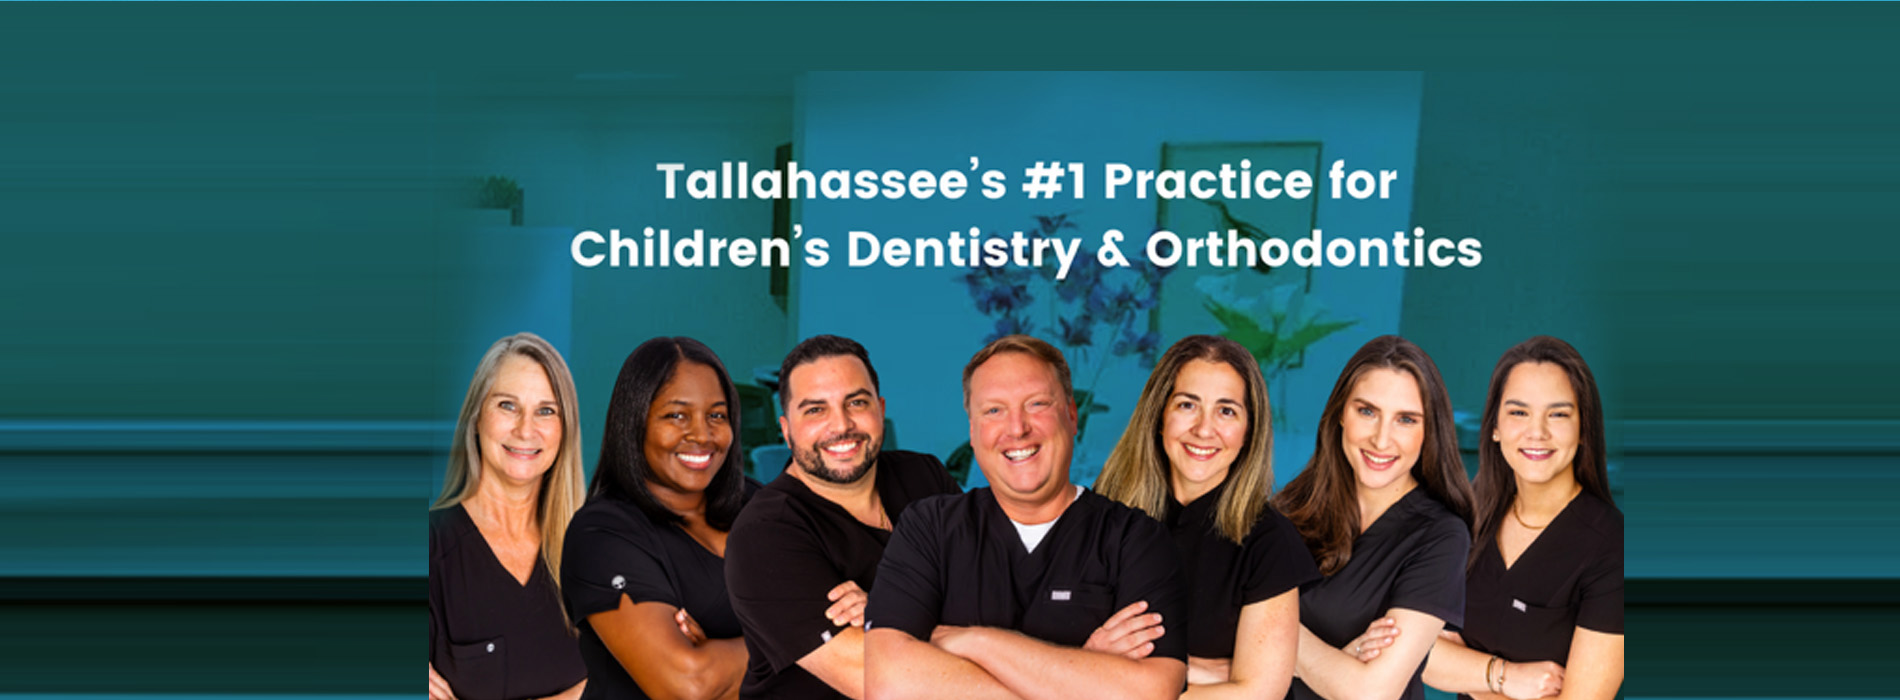 The image is a screenshot of a webpage with a group of individuals posing for a photo, likely related to dental or medical education. They are standing in front of a background that includes text and logos, suggesting they might be part of an educational institution or program.